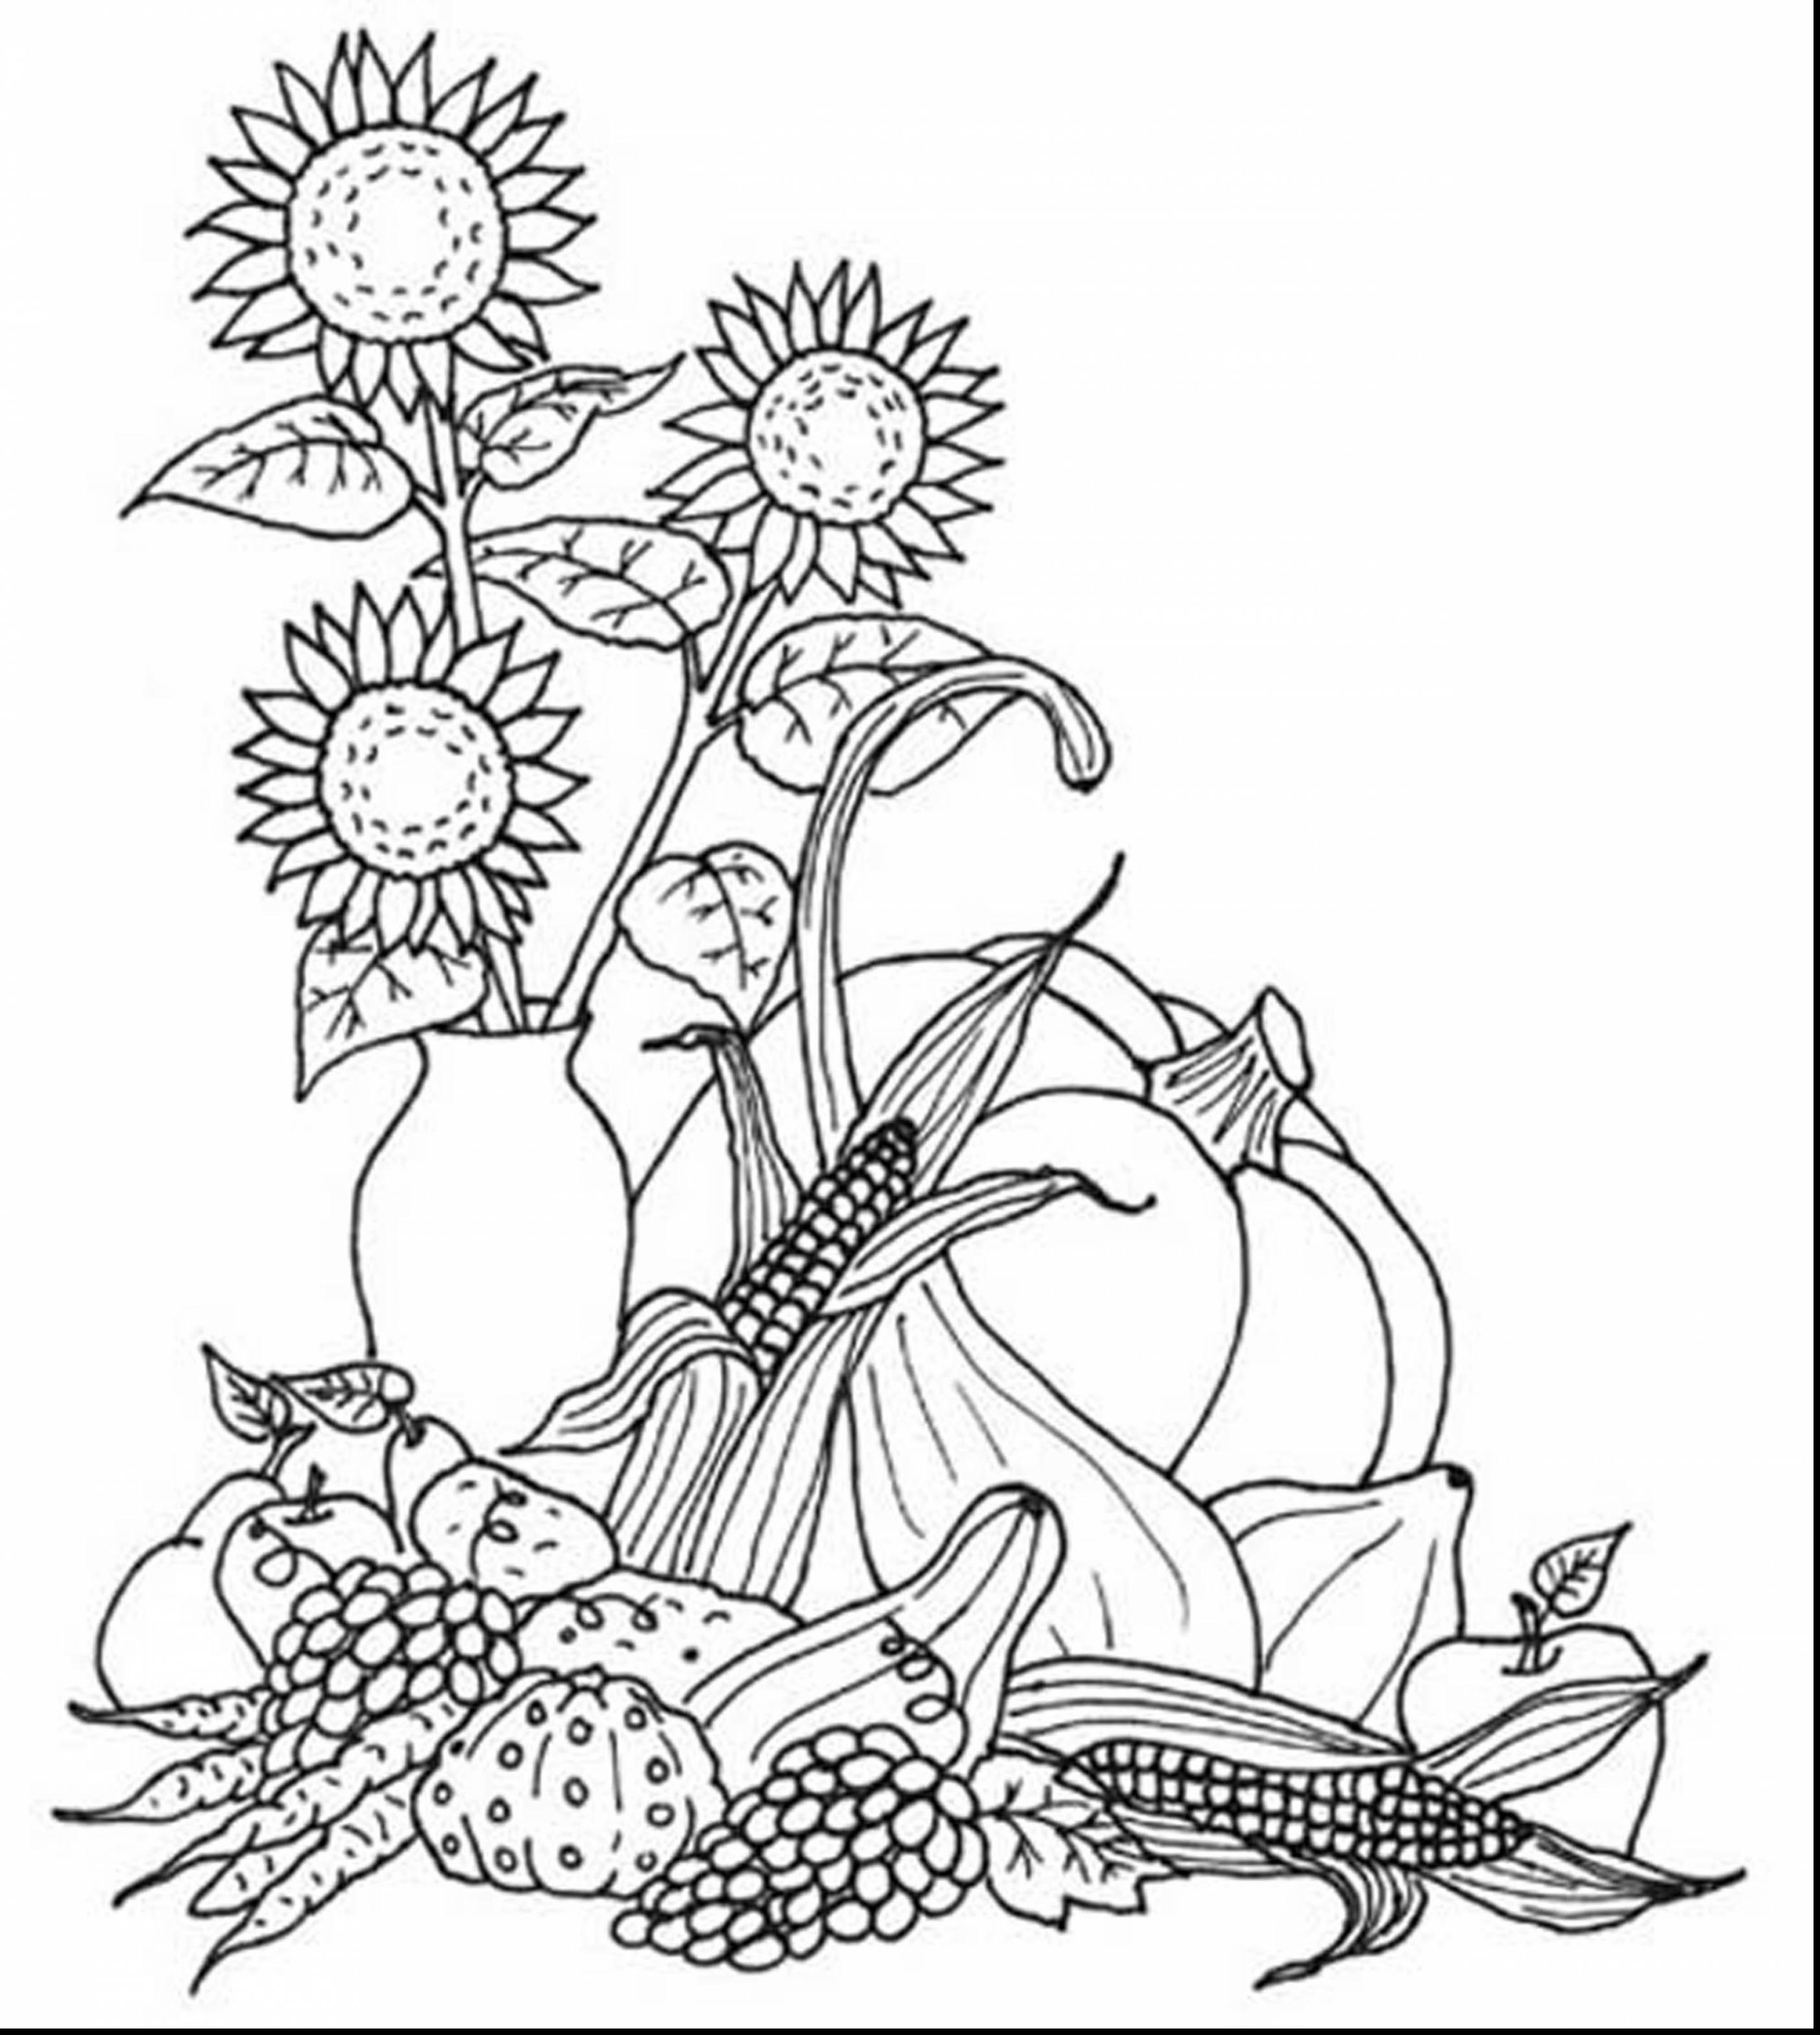 Harvest Coloring Pages Printables - Free Printable Fall Harvest Coloring Pages